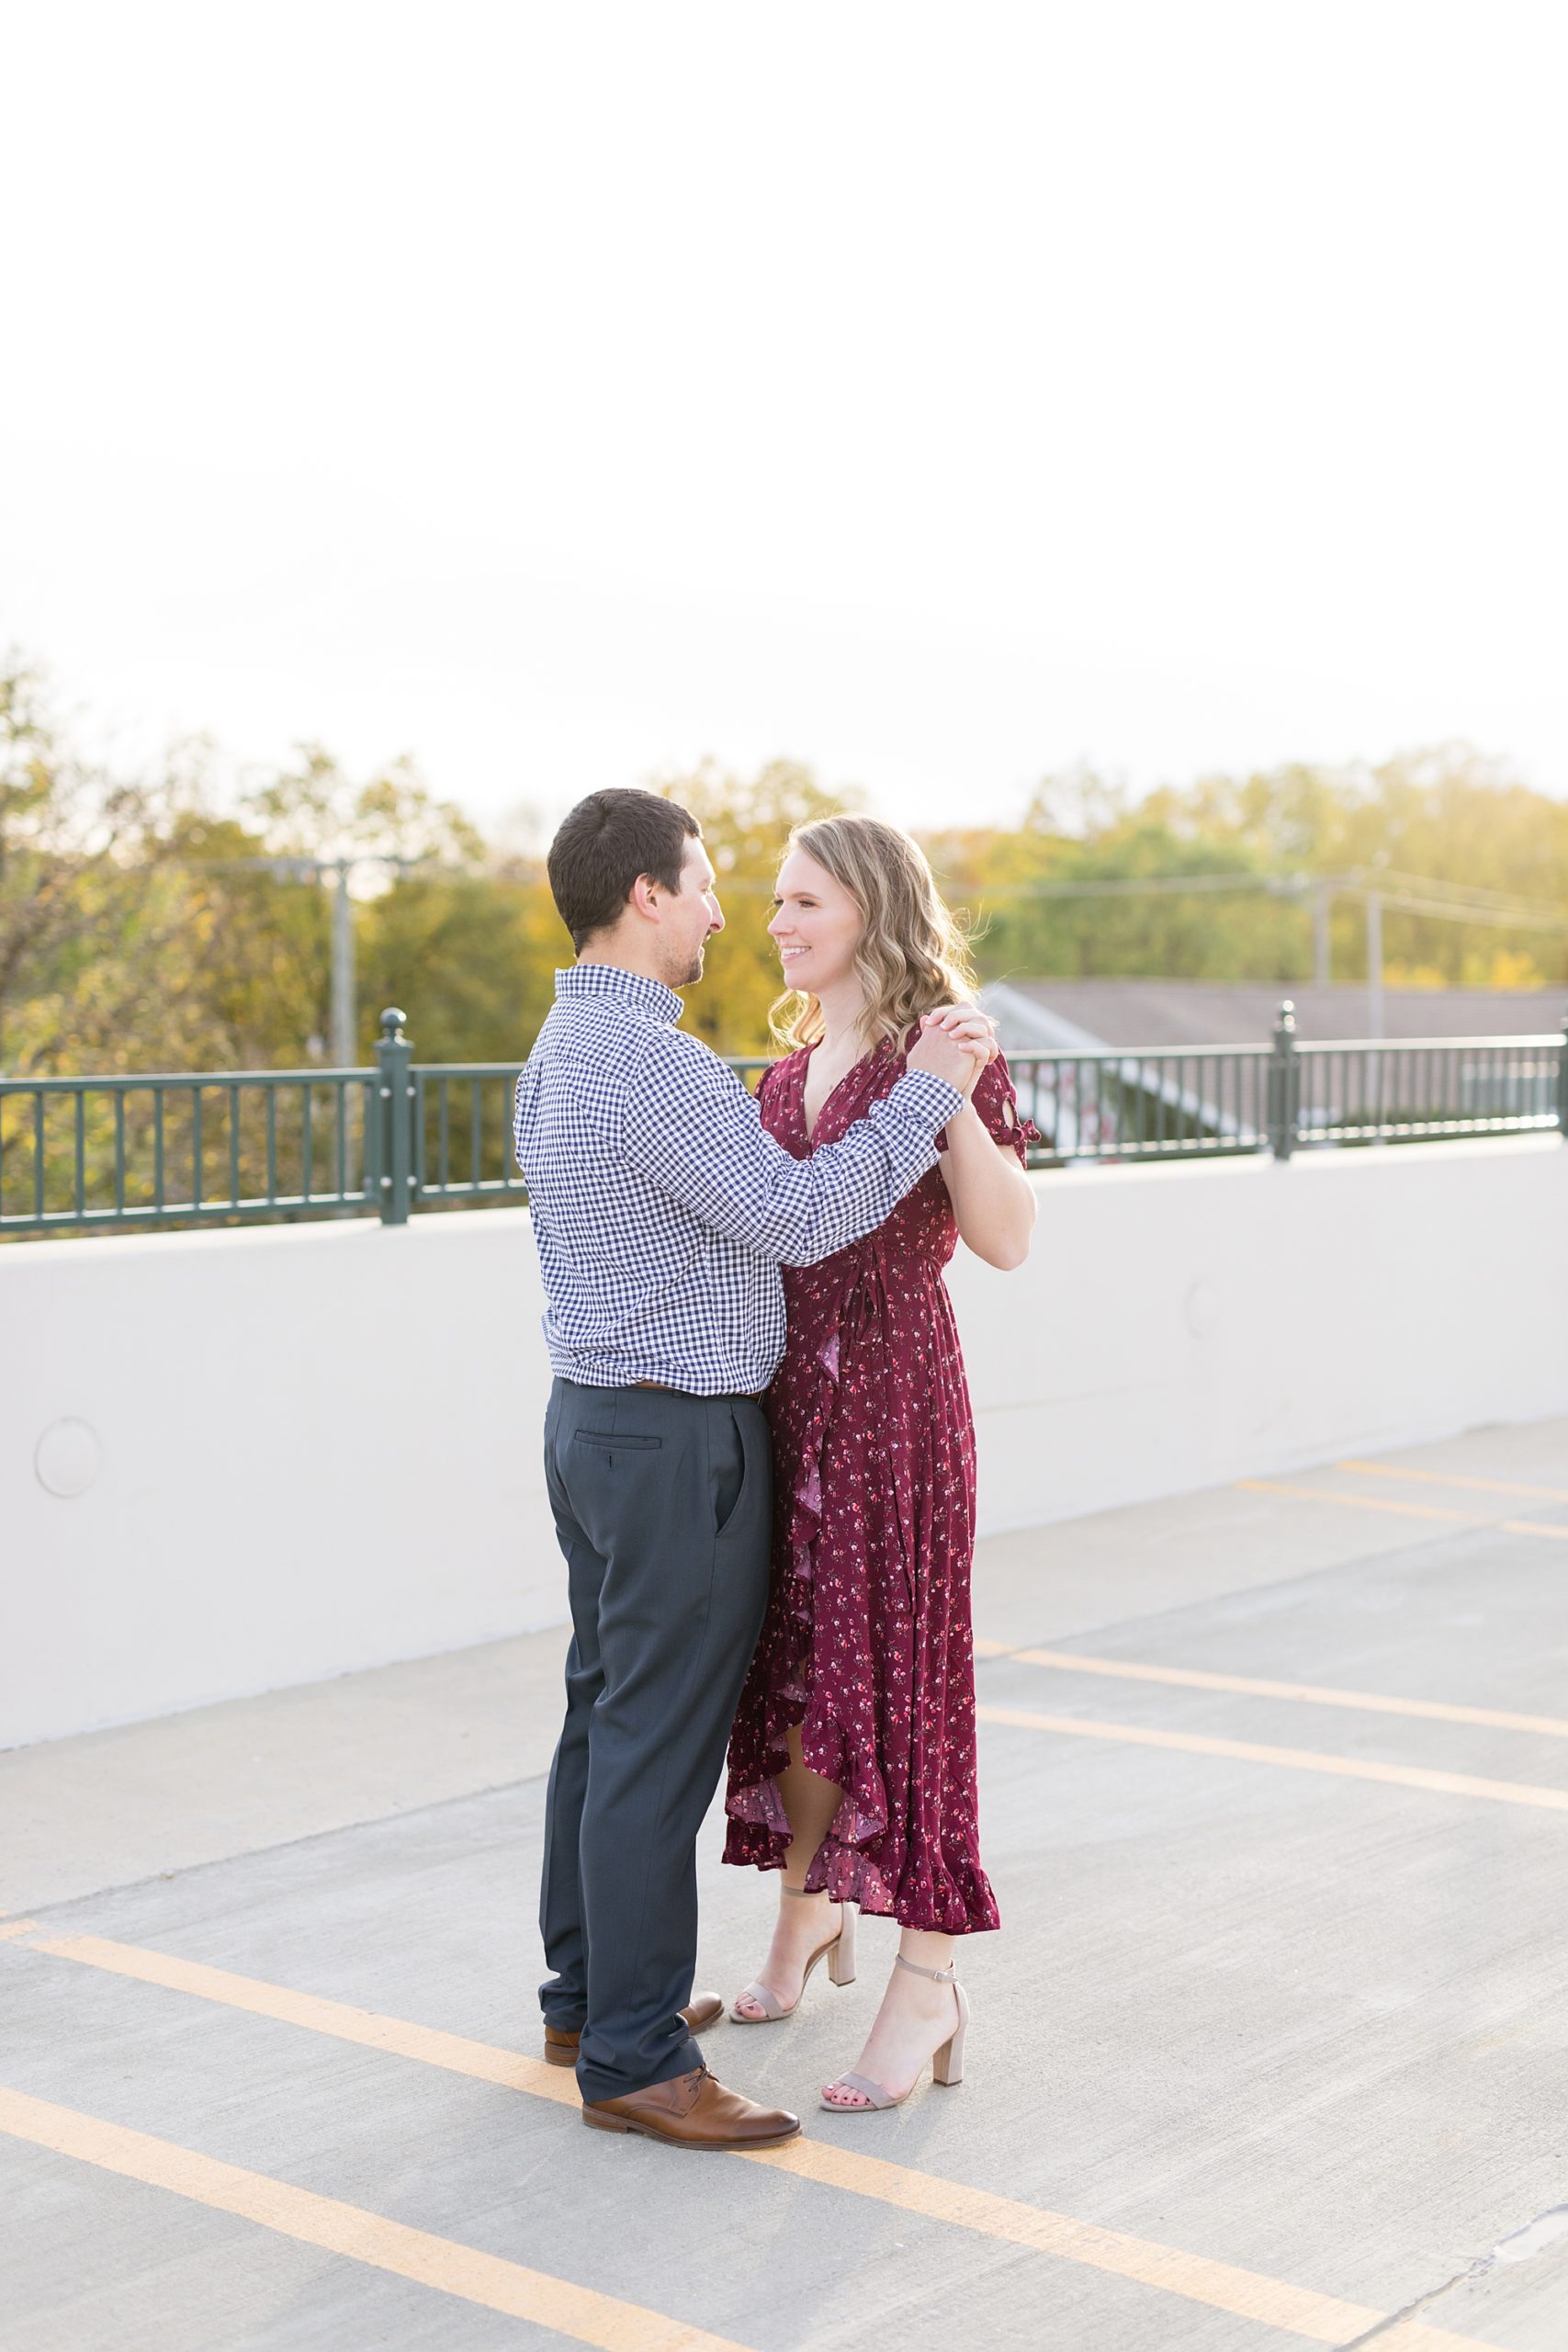 Amanda and Kevin Engagement Session | Breanne Rochelle Photography